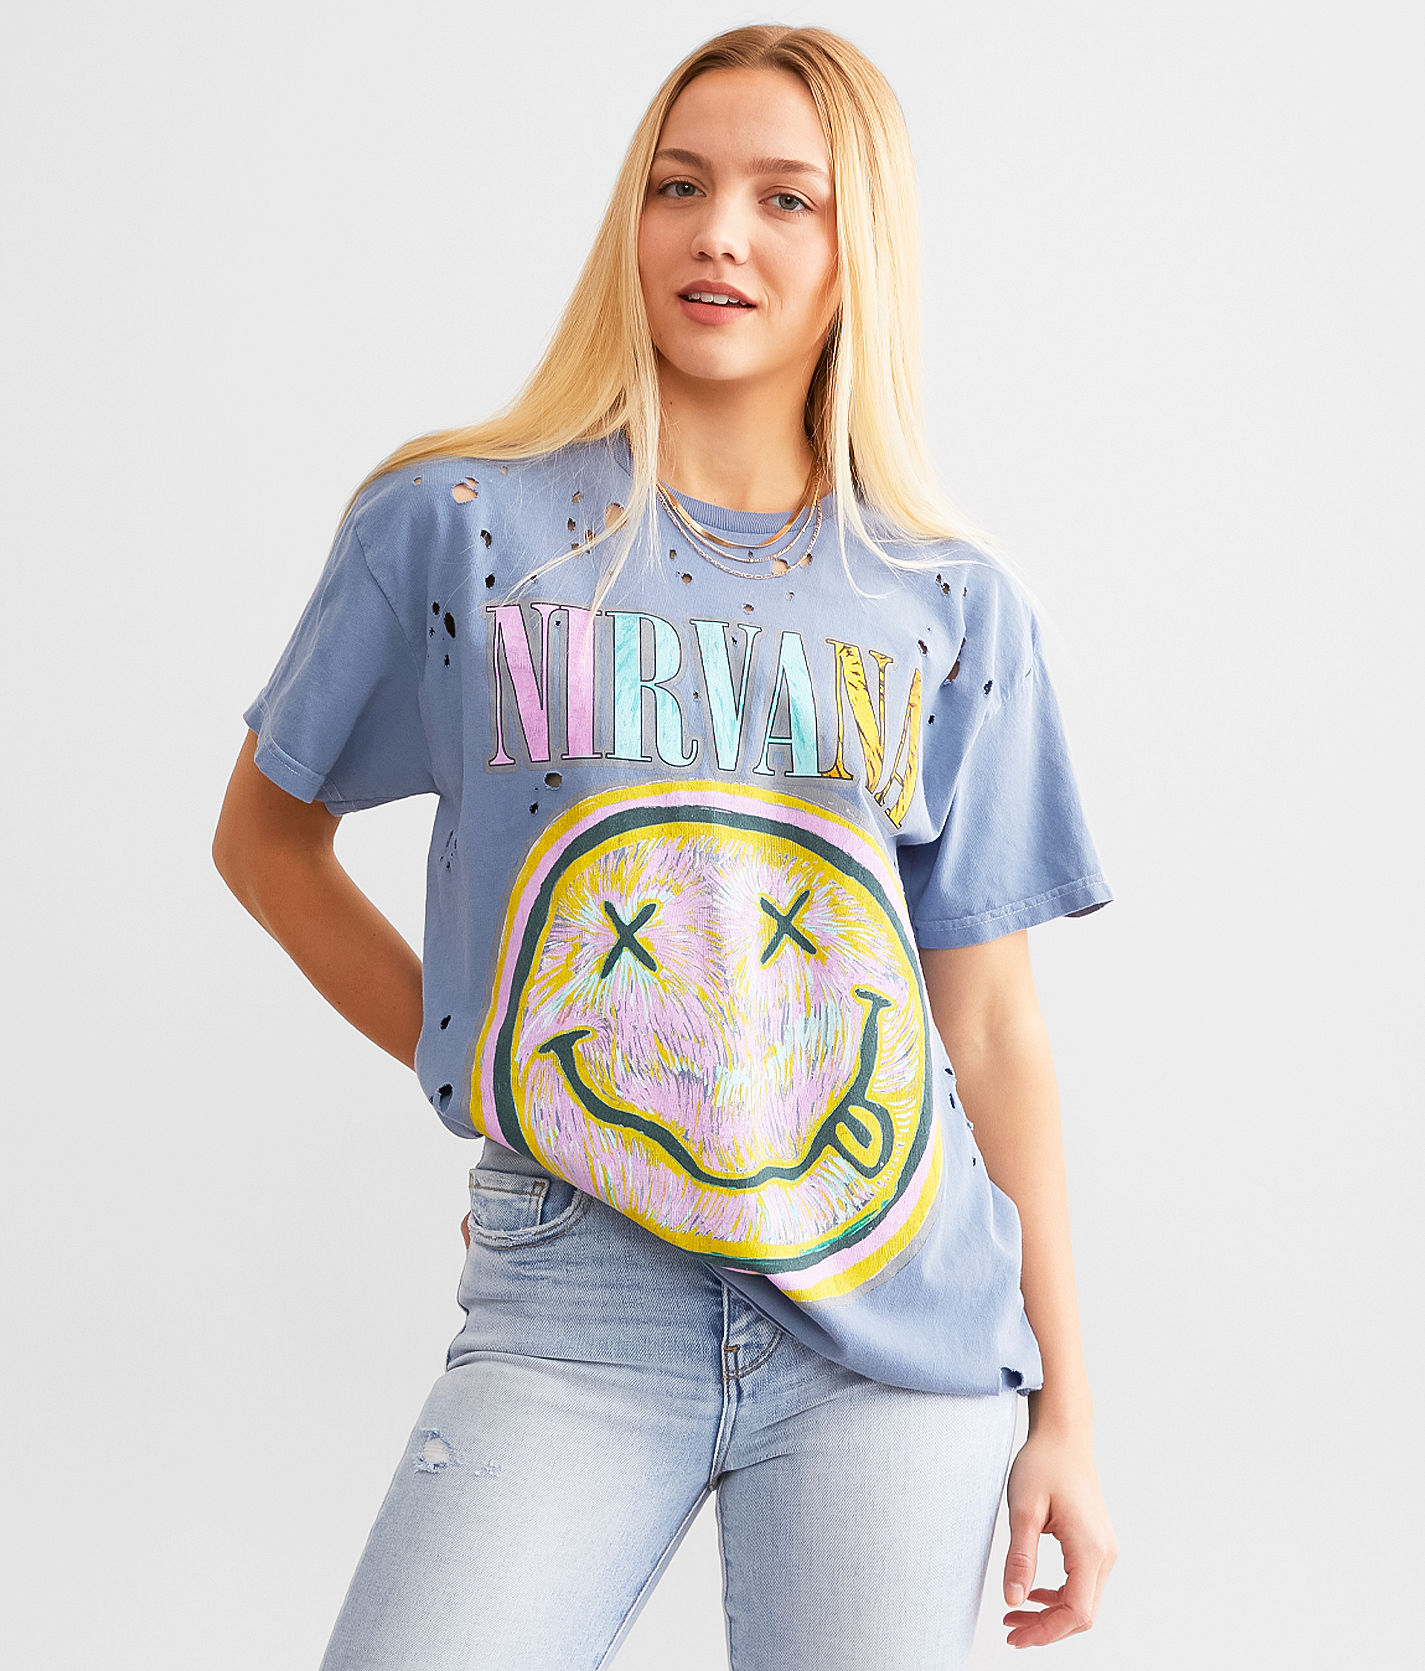 Nirvana® Smiley Oversized Band T-Shirt - Women's T-Shirts in Navy 